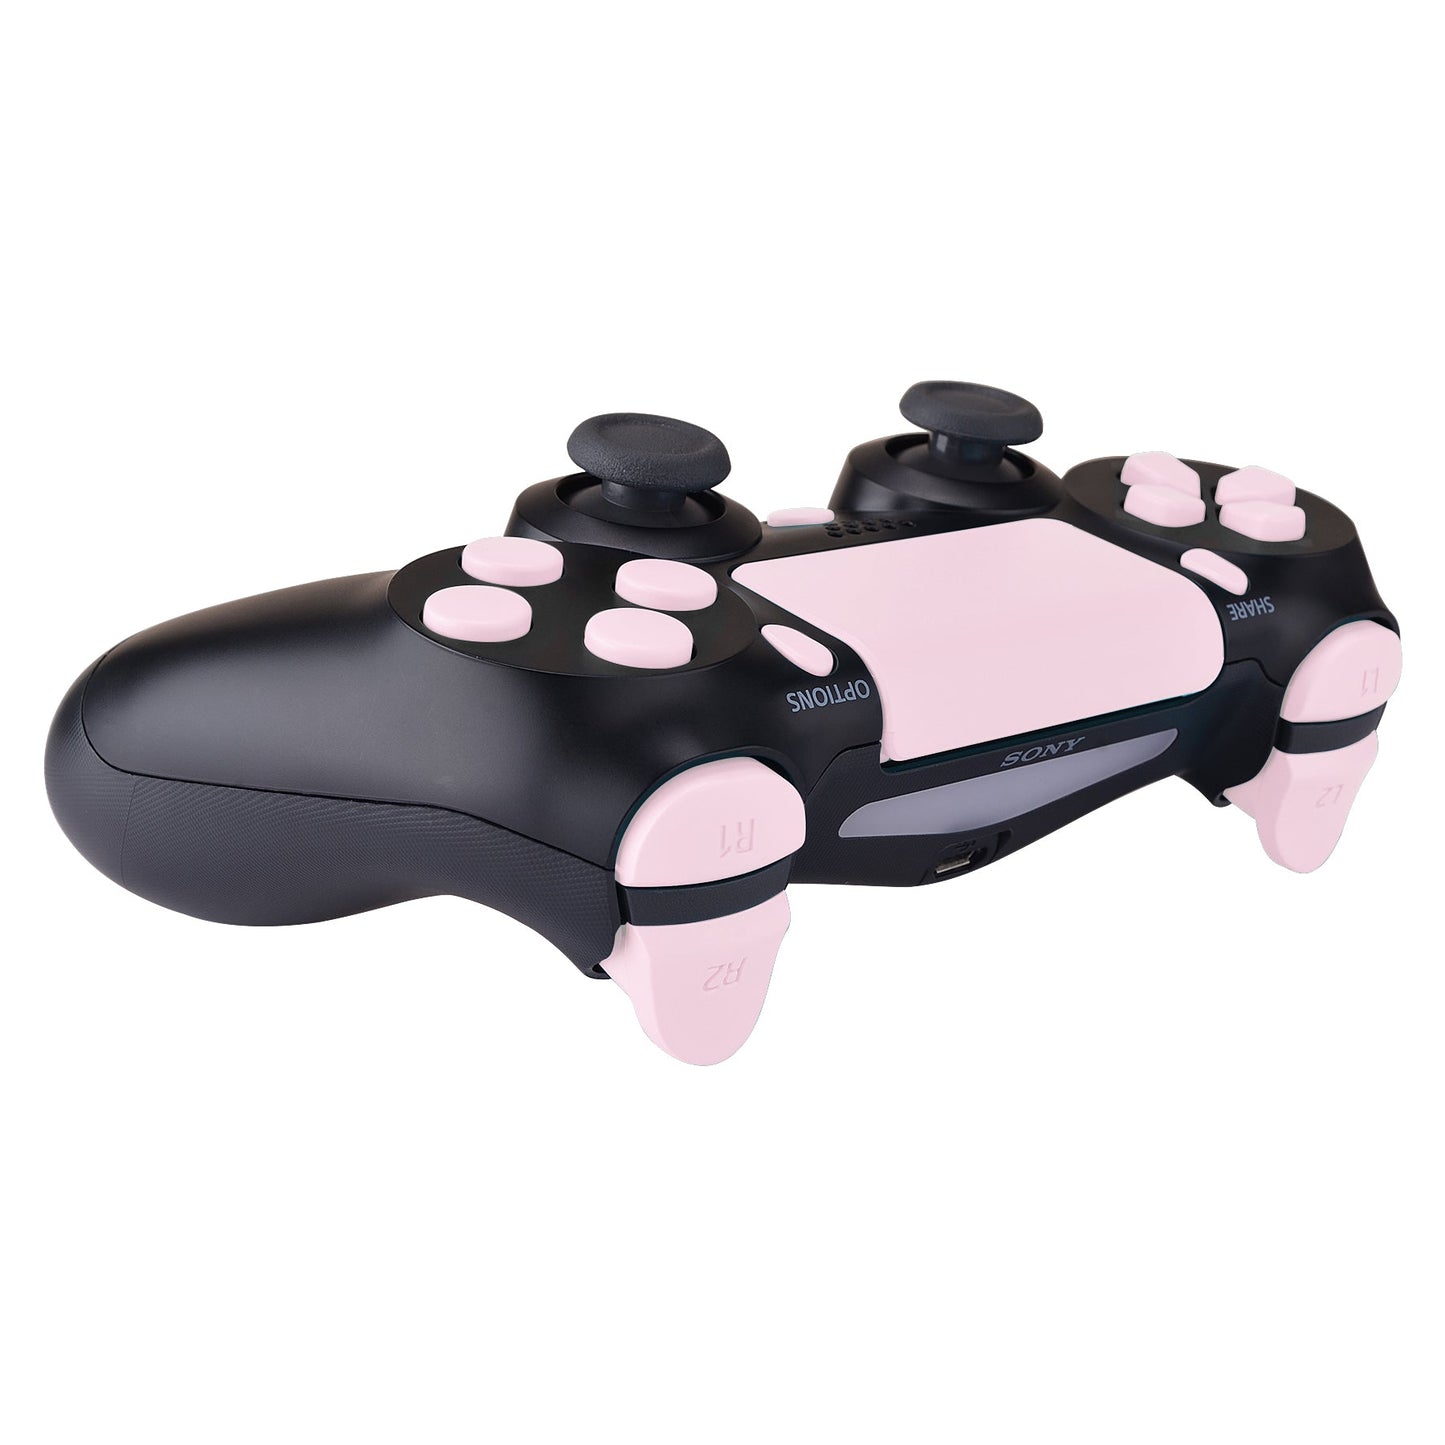 D-pad ps4 L2 Replacement Controller eXtremeRate Slim eXtremeRate Pink Kit Home Triggers Pro Buttons Buttons Share Cherry Controller, Repair – R1 Touchpad Action for Options L1 Full Set R2 for ps4 Blossoms